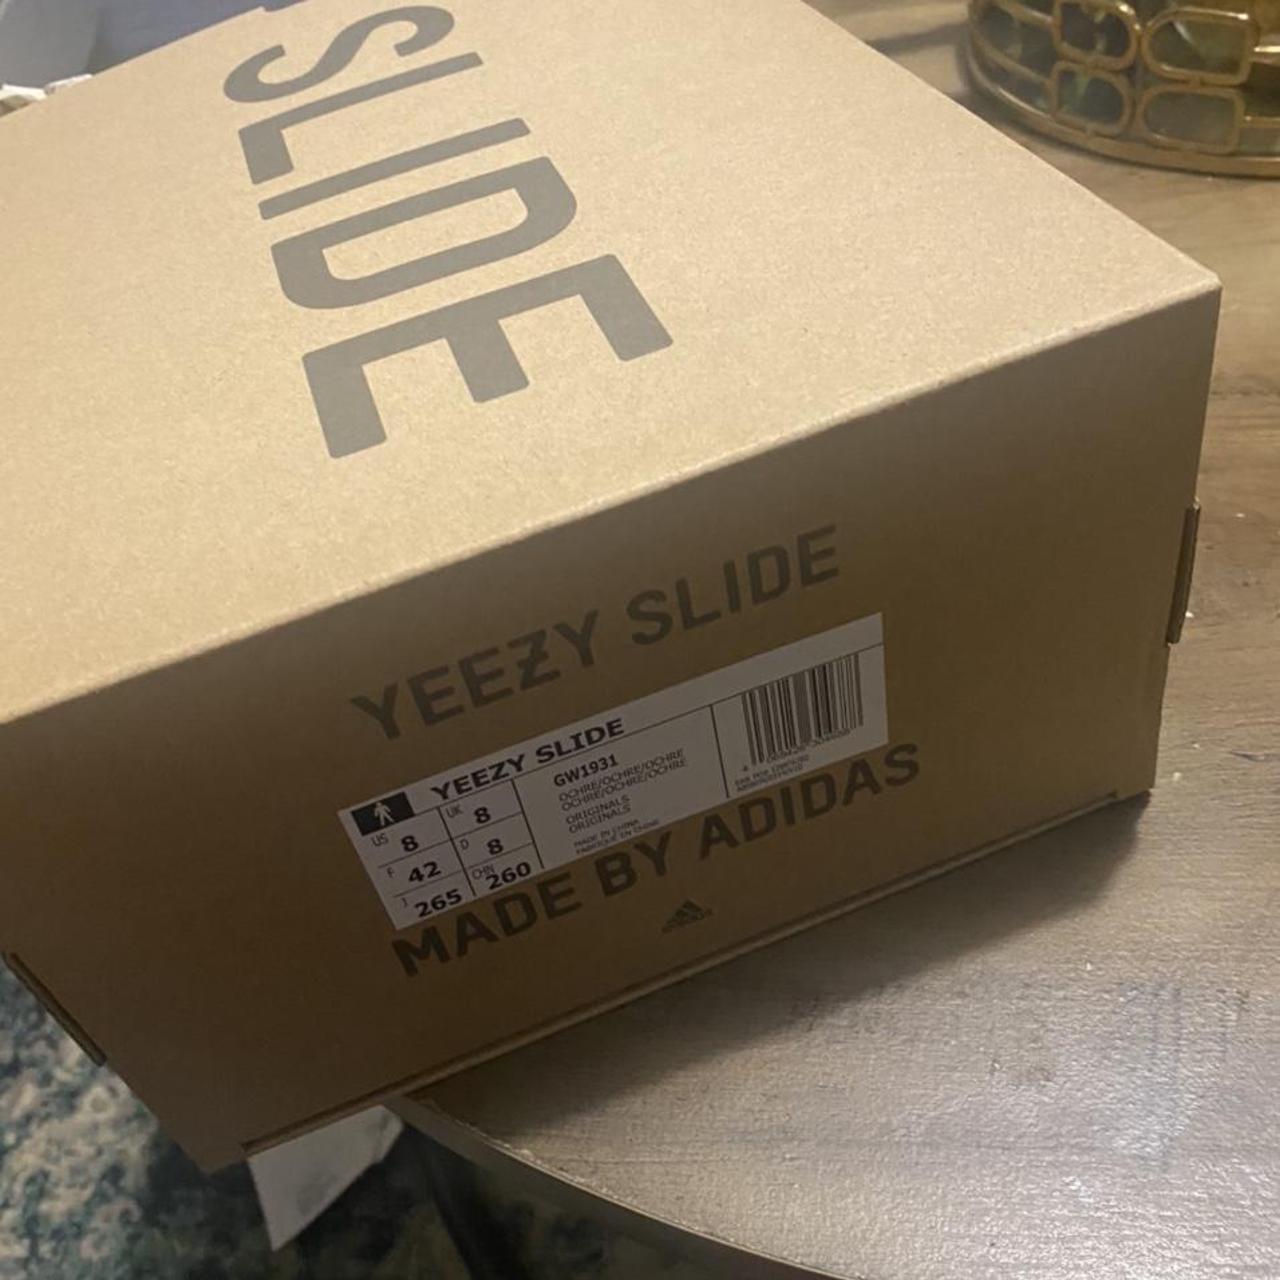 Brand new Yeezy slide never worn , comes with box... - Depop